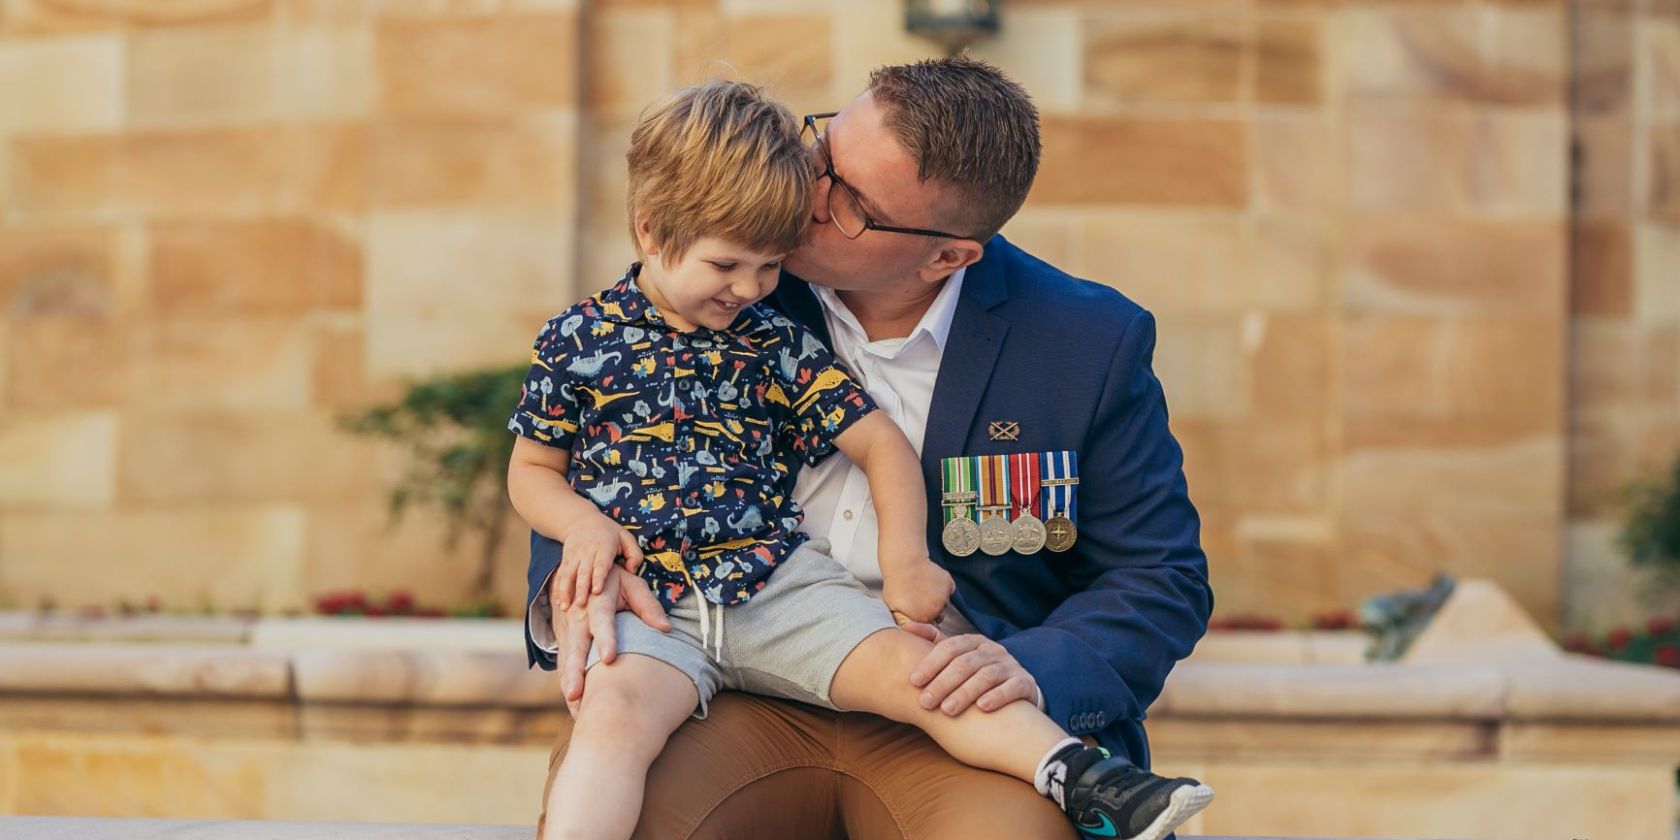 Courage, mateship and respect, Suncorp Defence families share their touching ANZAC Day stories 